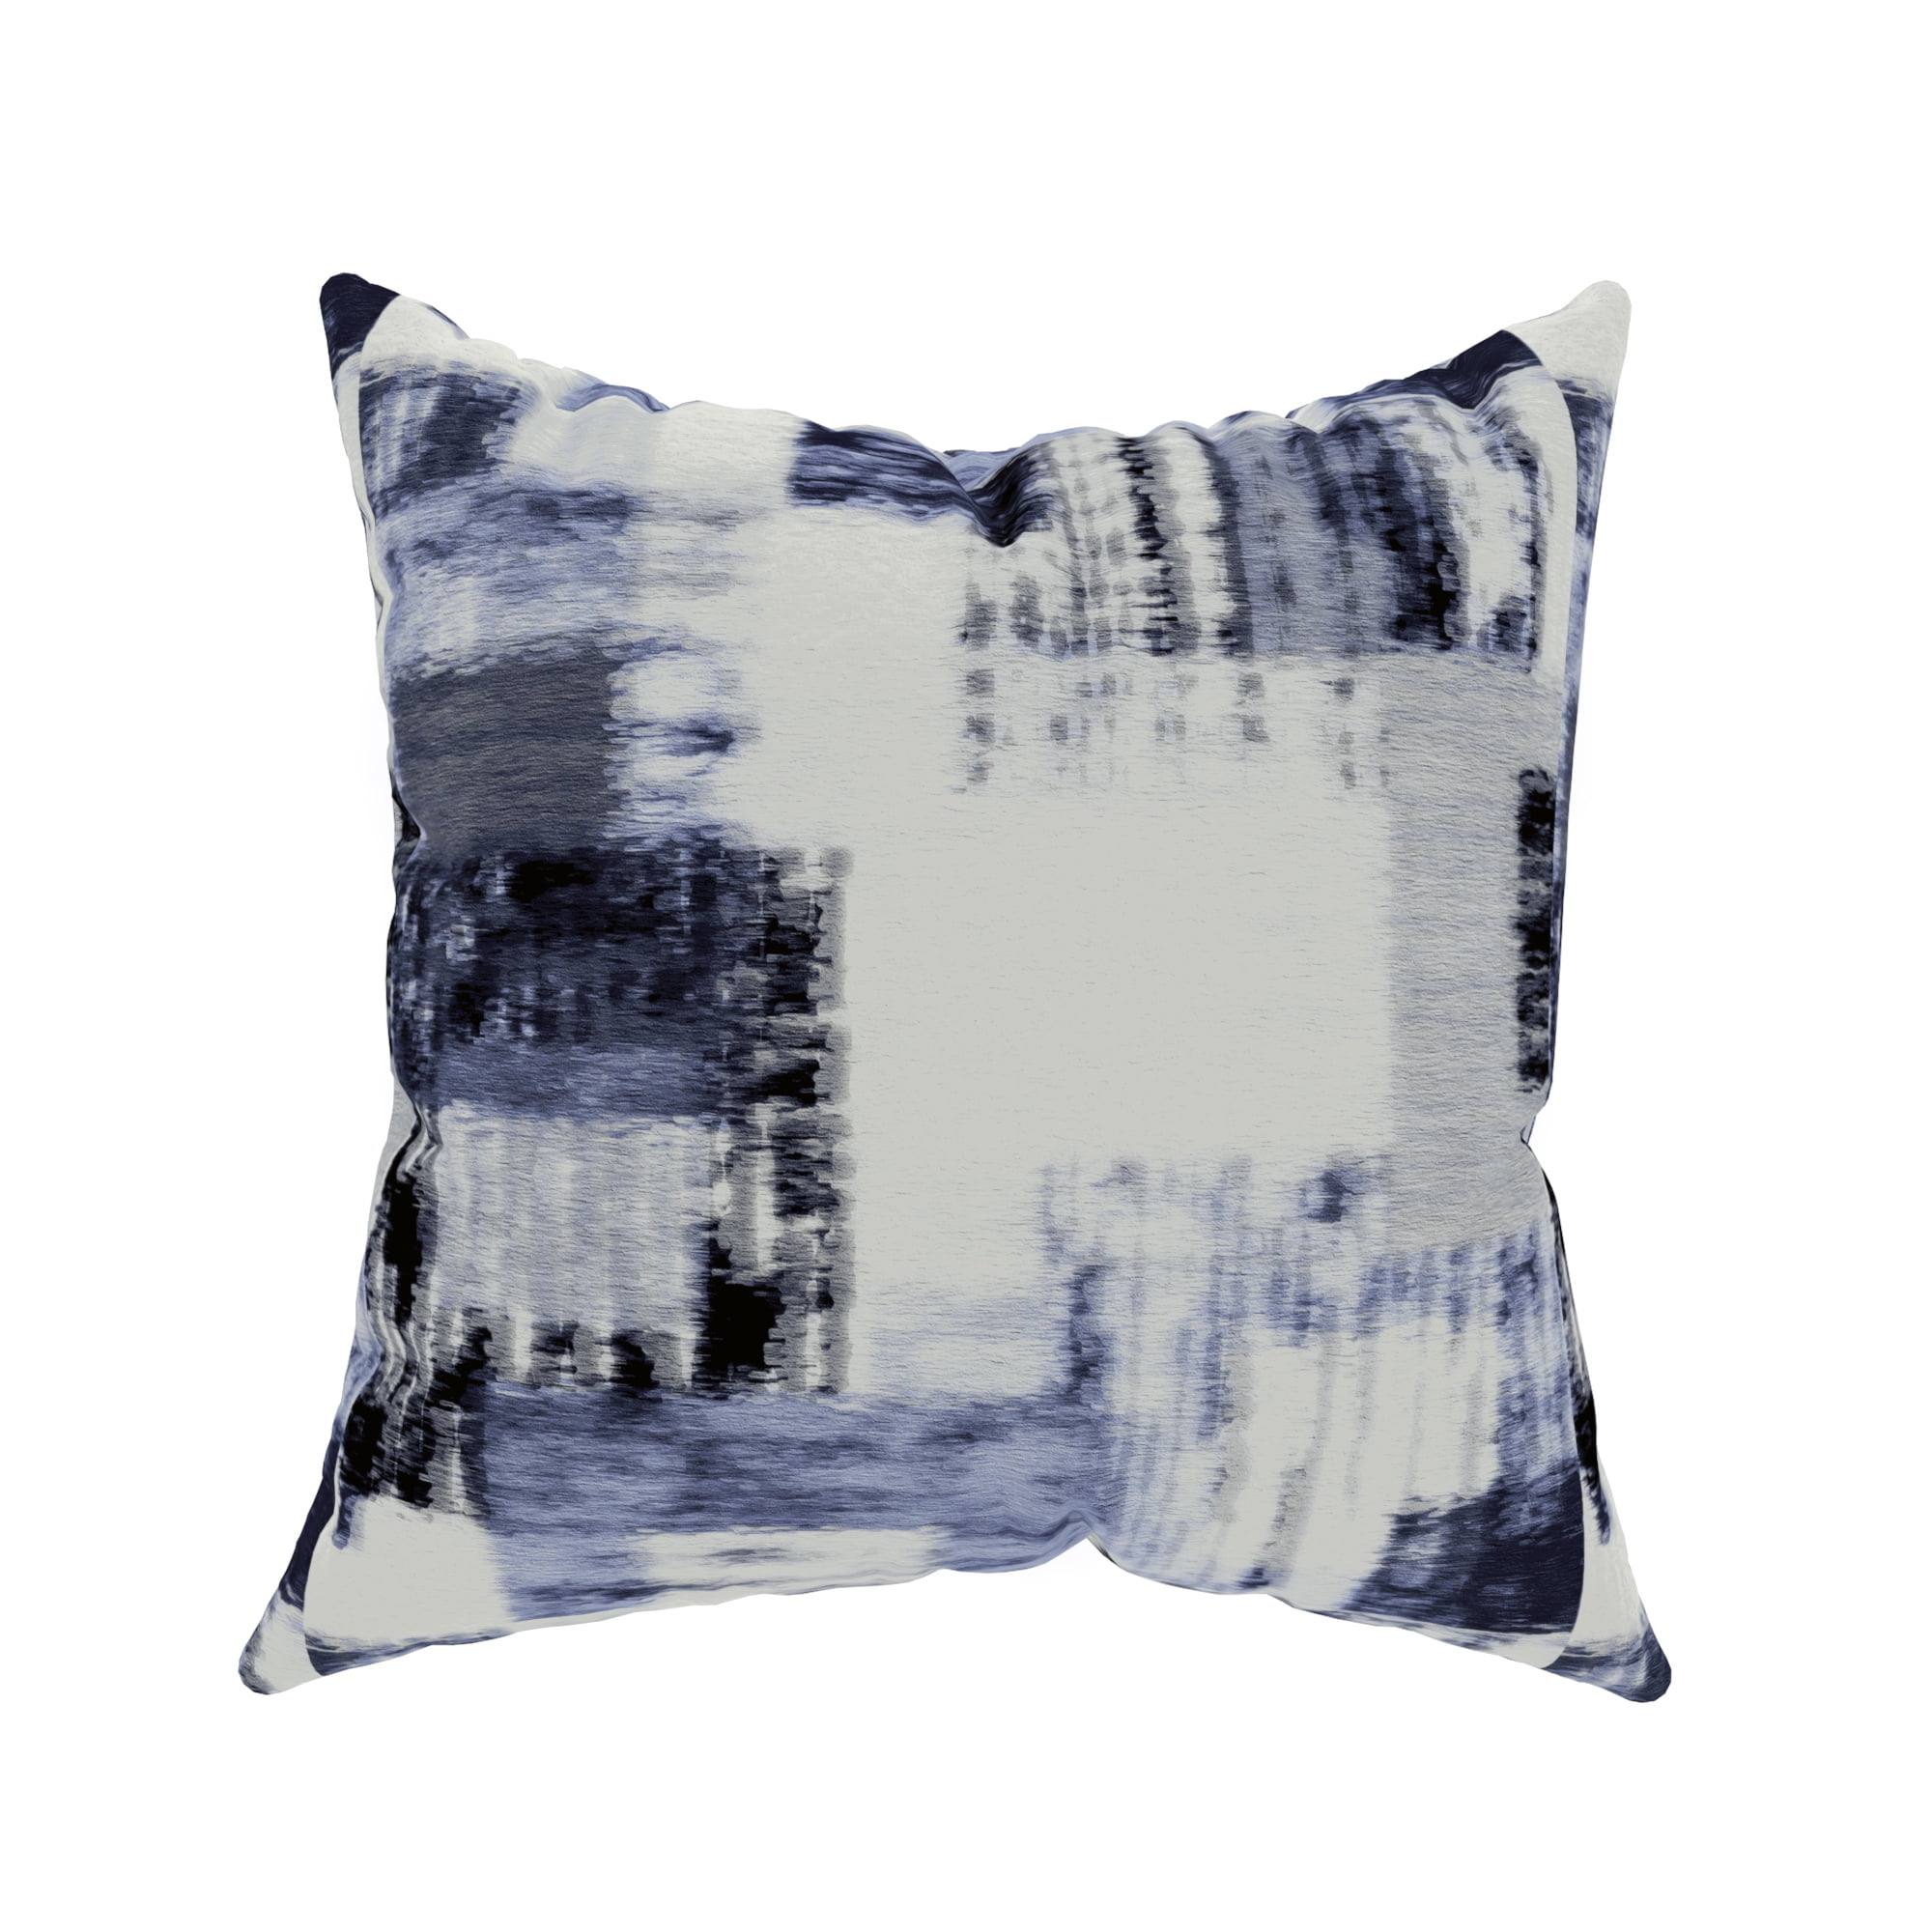 Best seller accent pillows Throw Pillow gift for the home bed room Navy blue living room wave pattern Home decor trendy pillow